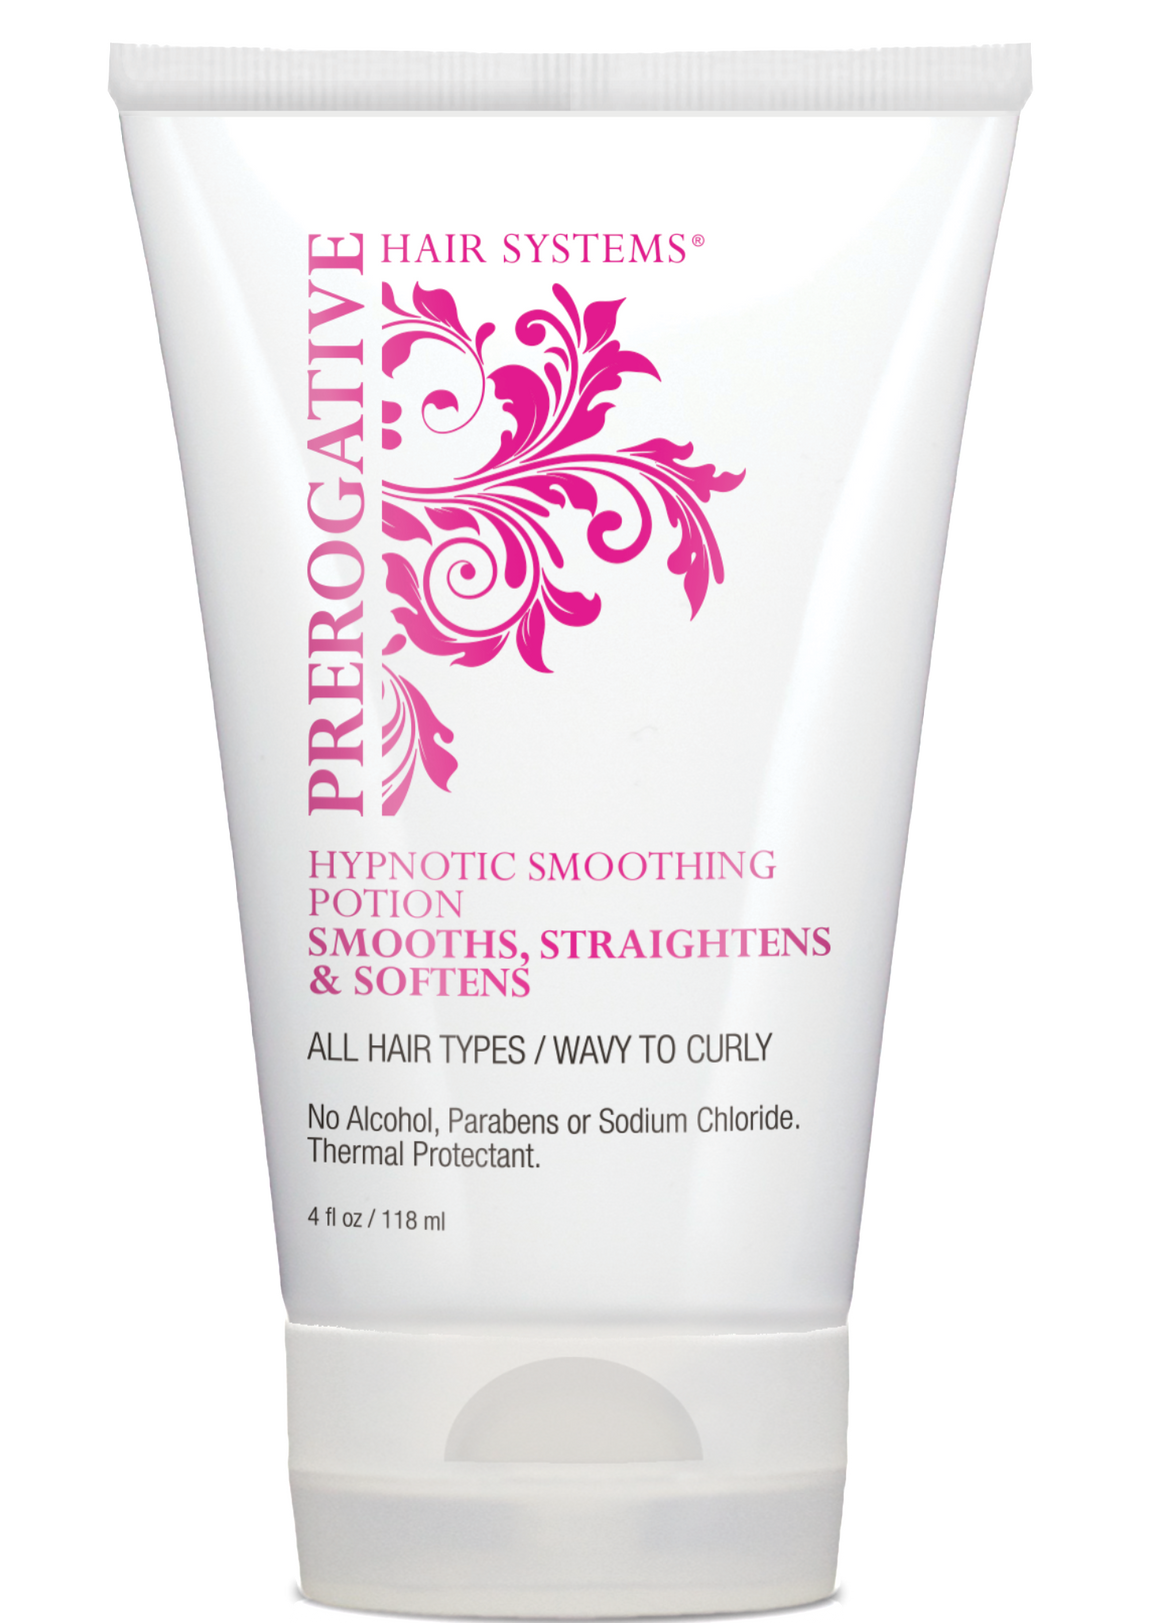 This hair straightening gel is one of the best natural ways to straighten hair with a blow drier